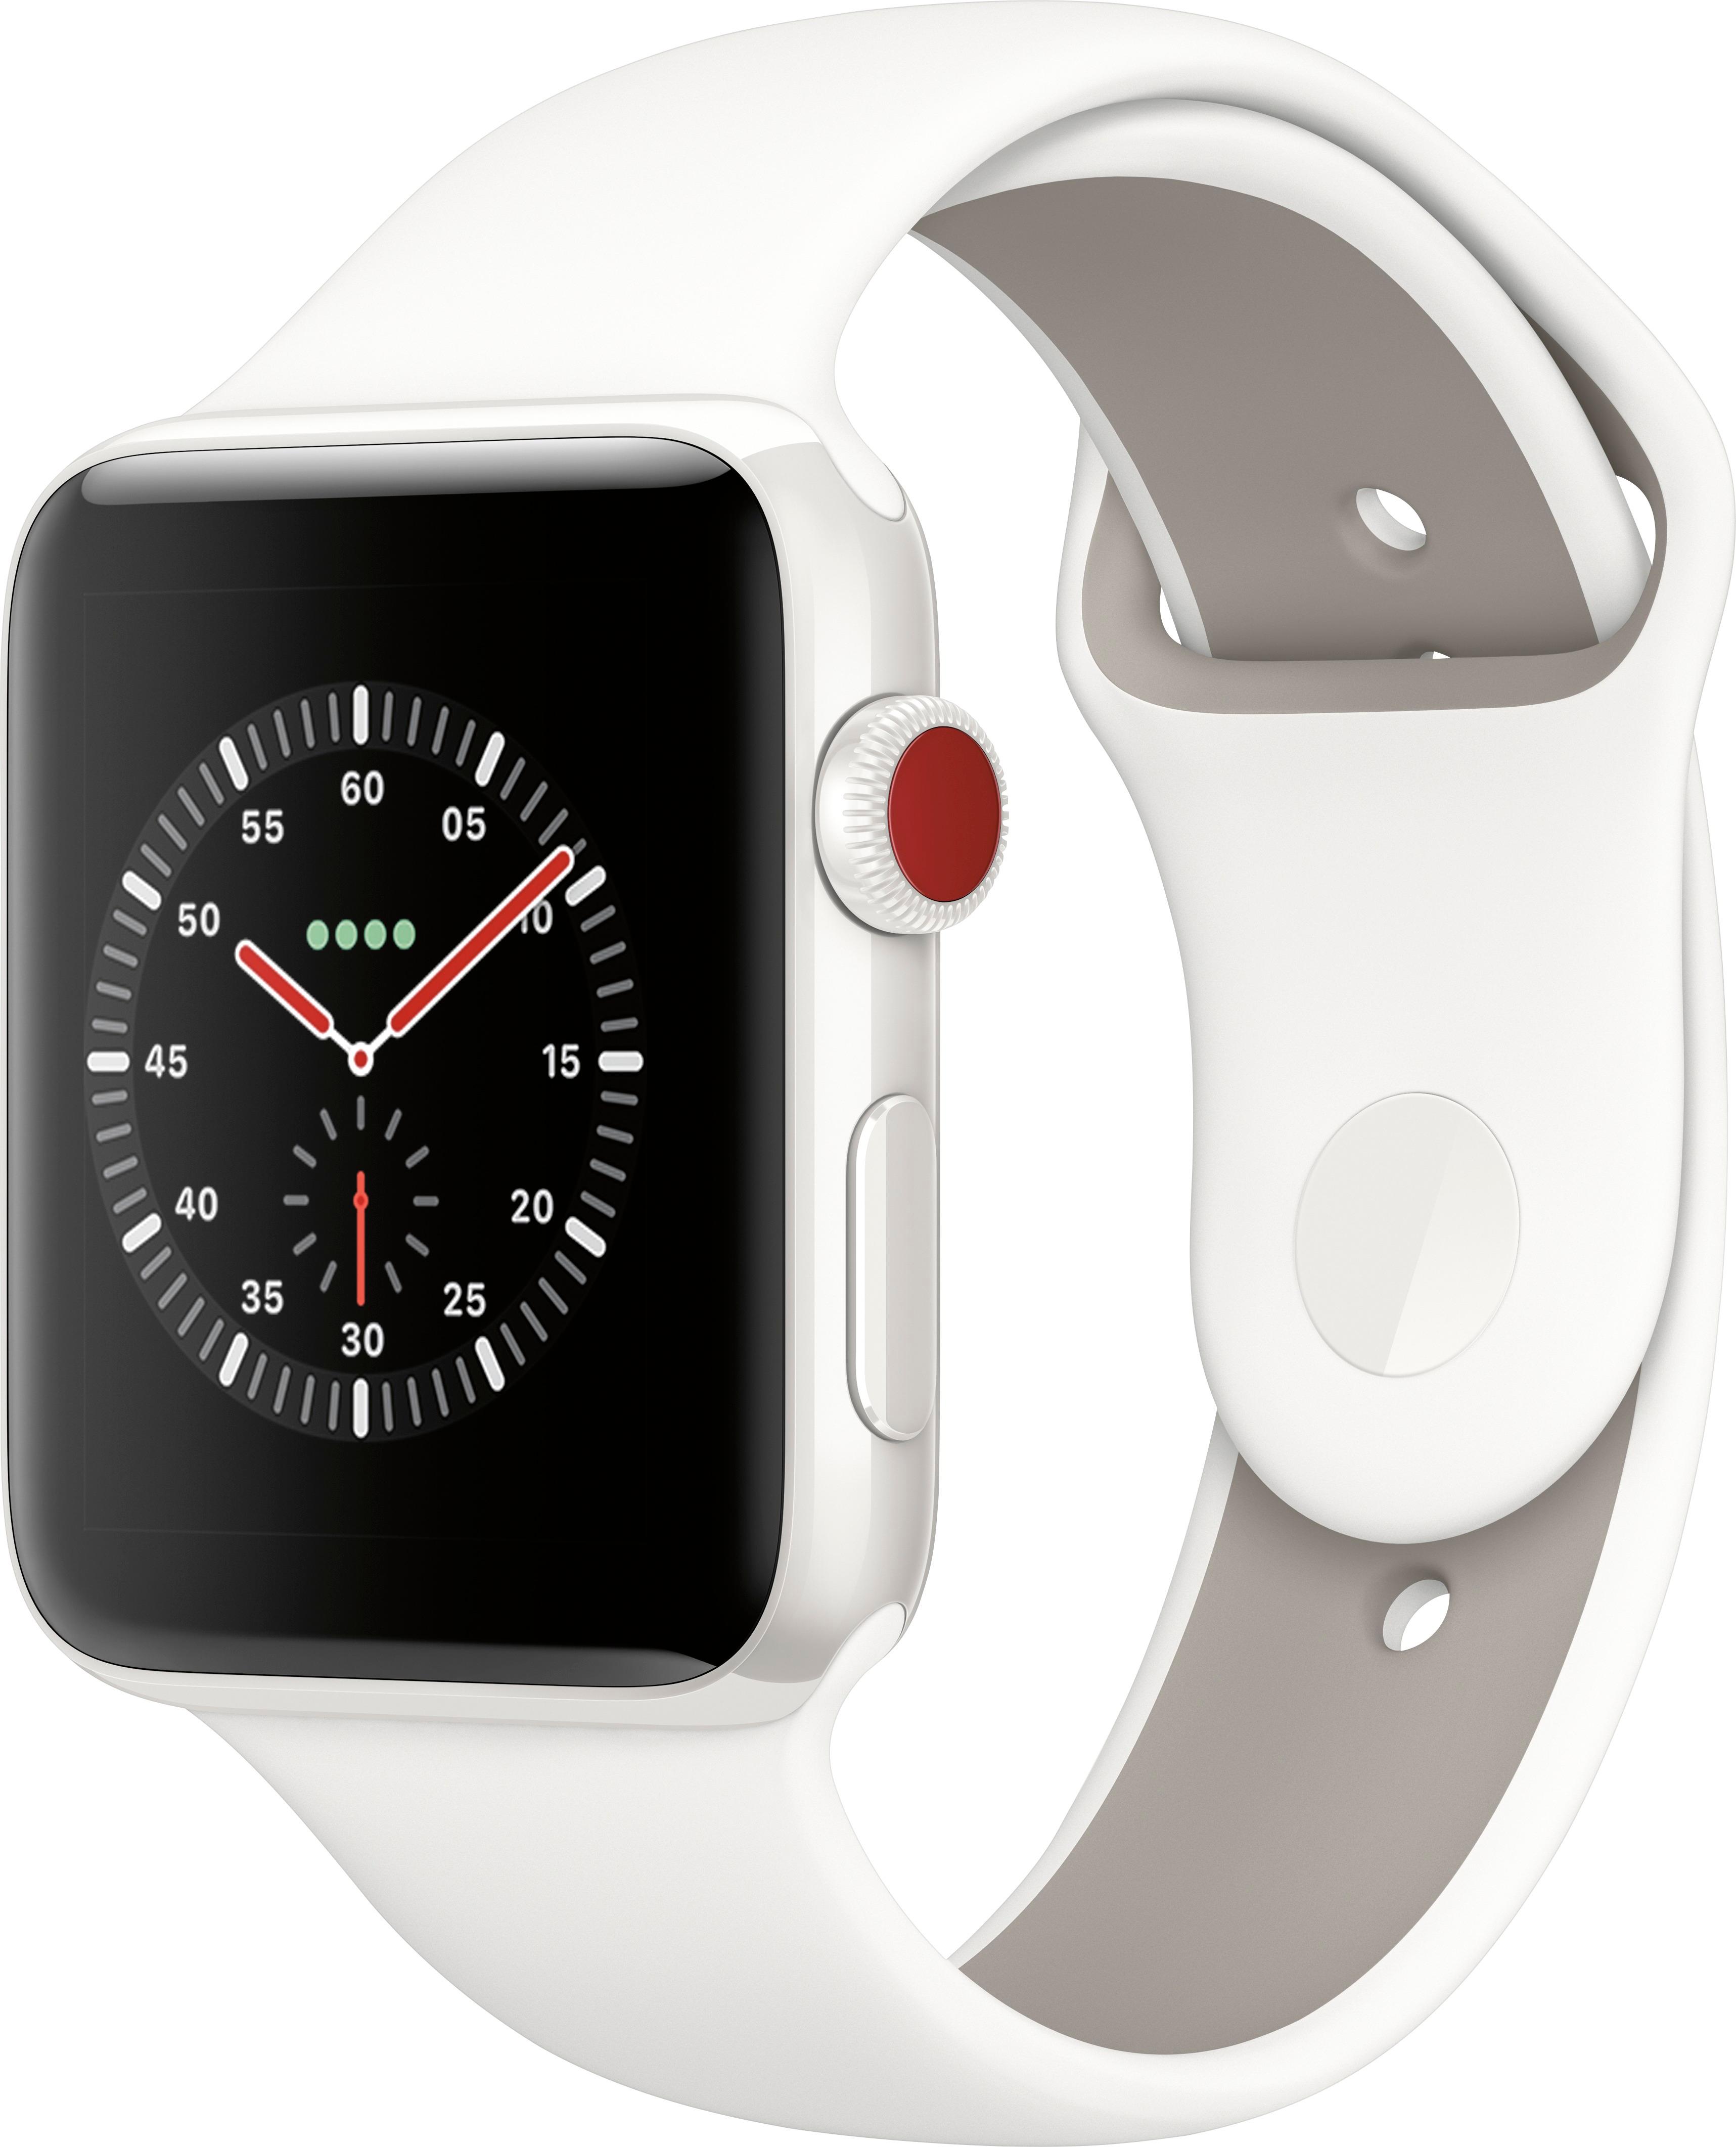 Angle View: Apple Watch Series 5 (GPS + Cellular) 40mm Stainless Steel Case with Black Sport Band - Space Black Stainless Steel (AT&T)